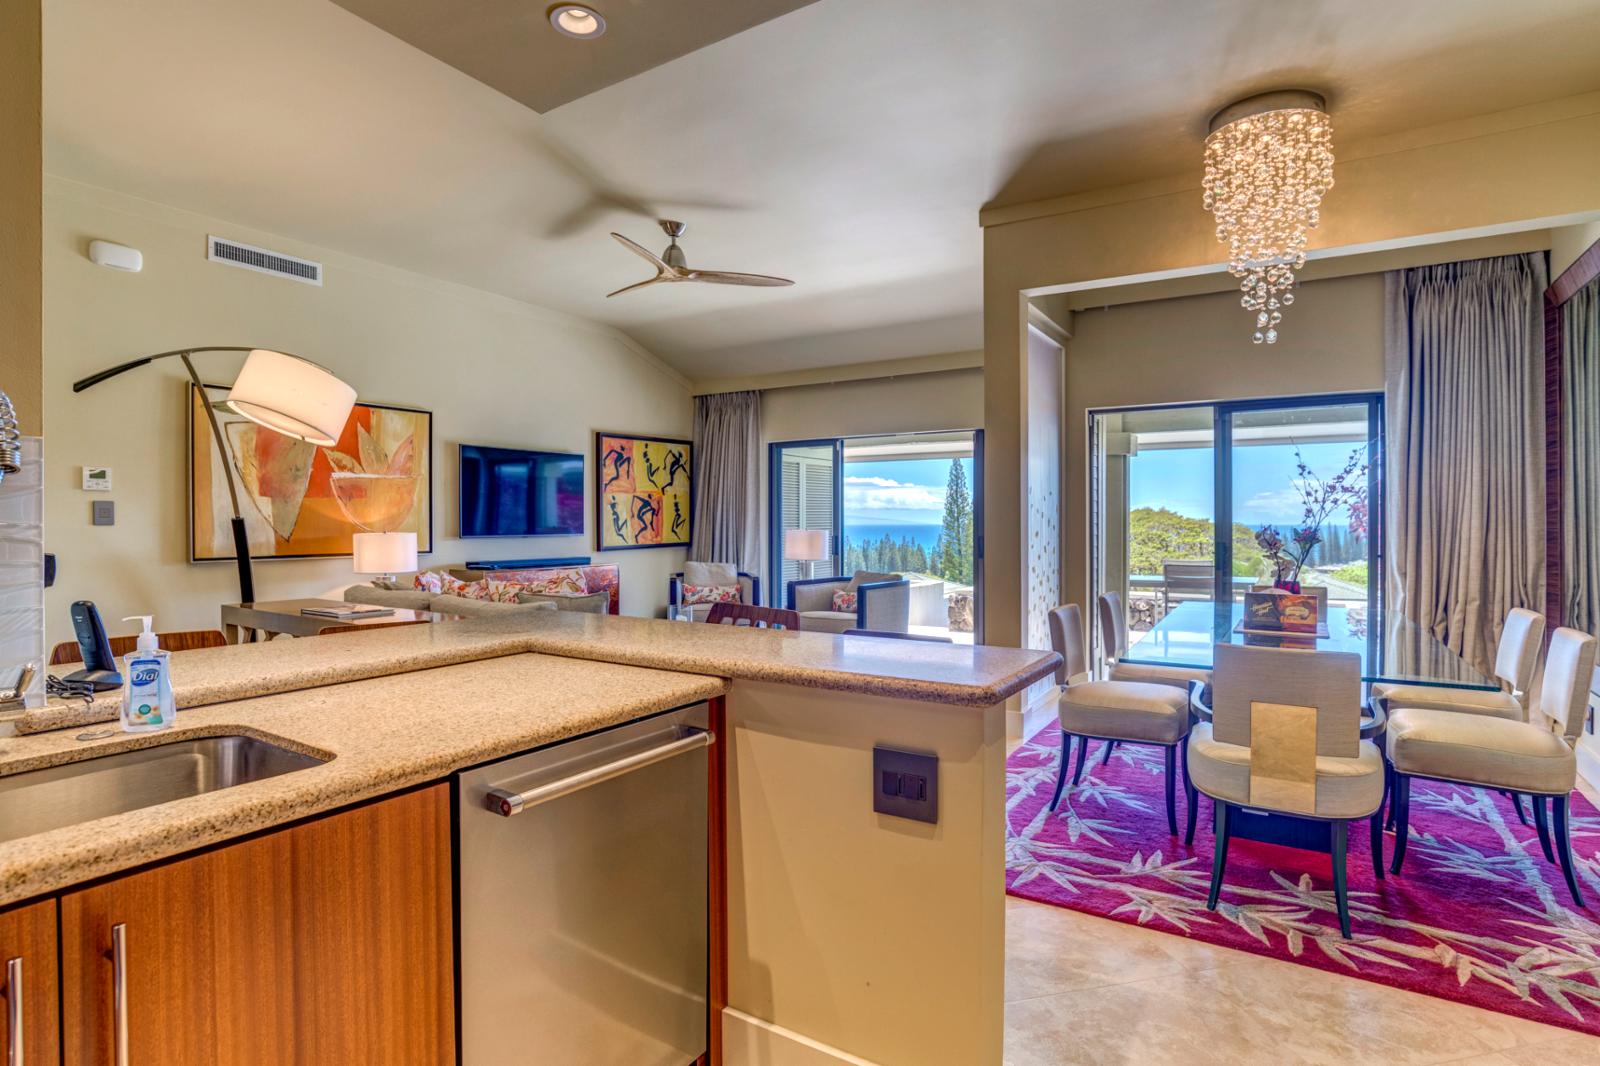 Entertain nightly in your modern beach house, stunning sunsets guaranteed 